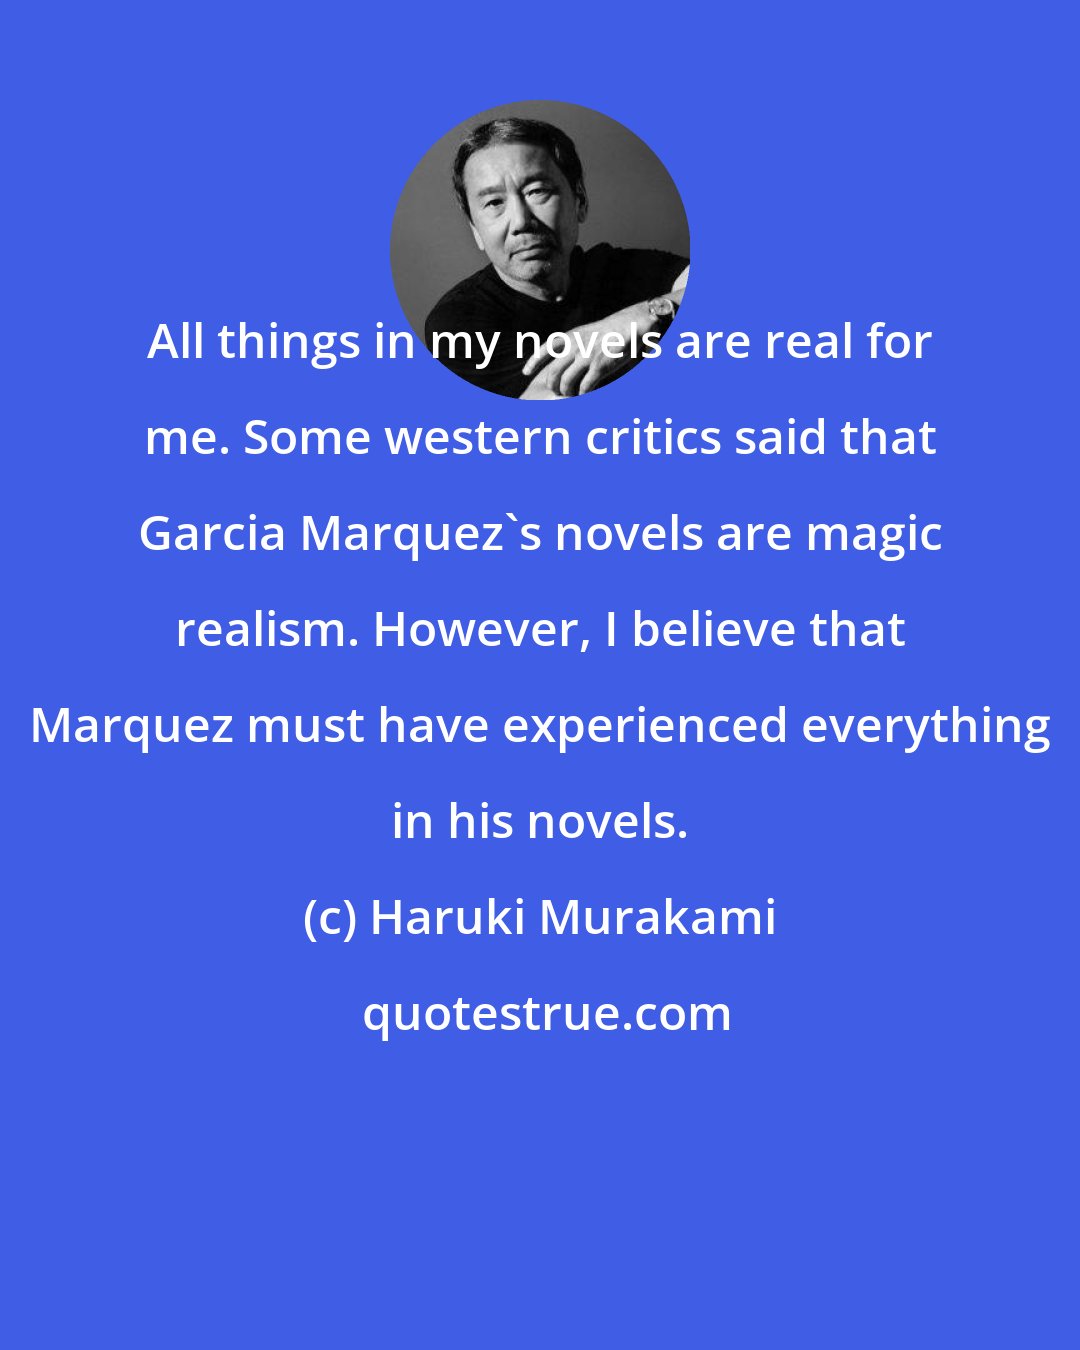 Haruki Murakami: All things in my novels are real for me. Some western critics said that Garcia Marquez's novels are magic realism. However, I believe that Marquez must have experienced everything in his novels.